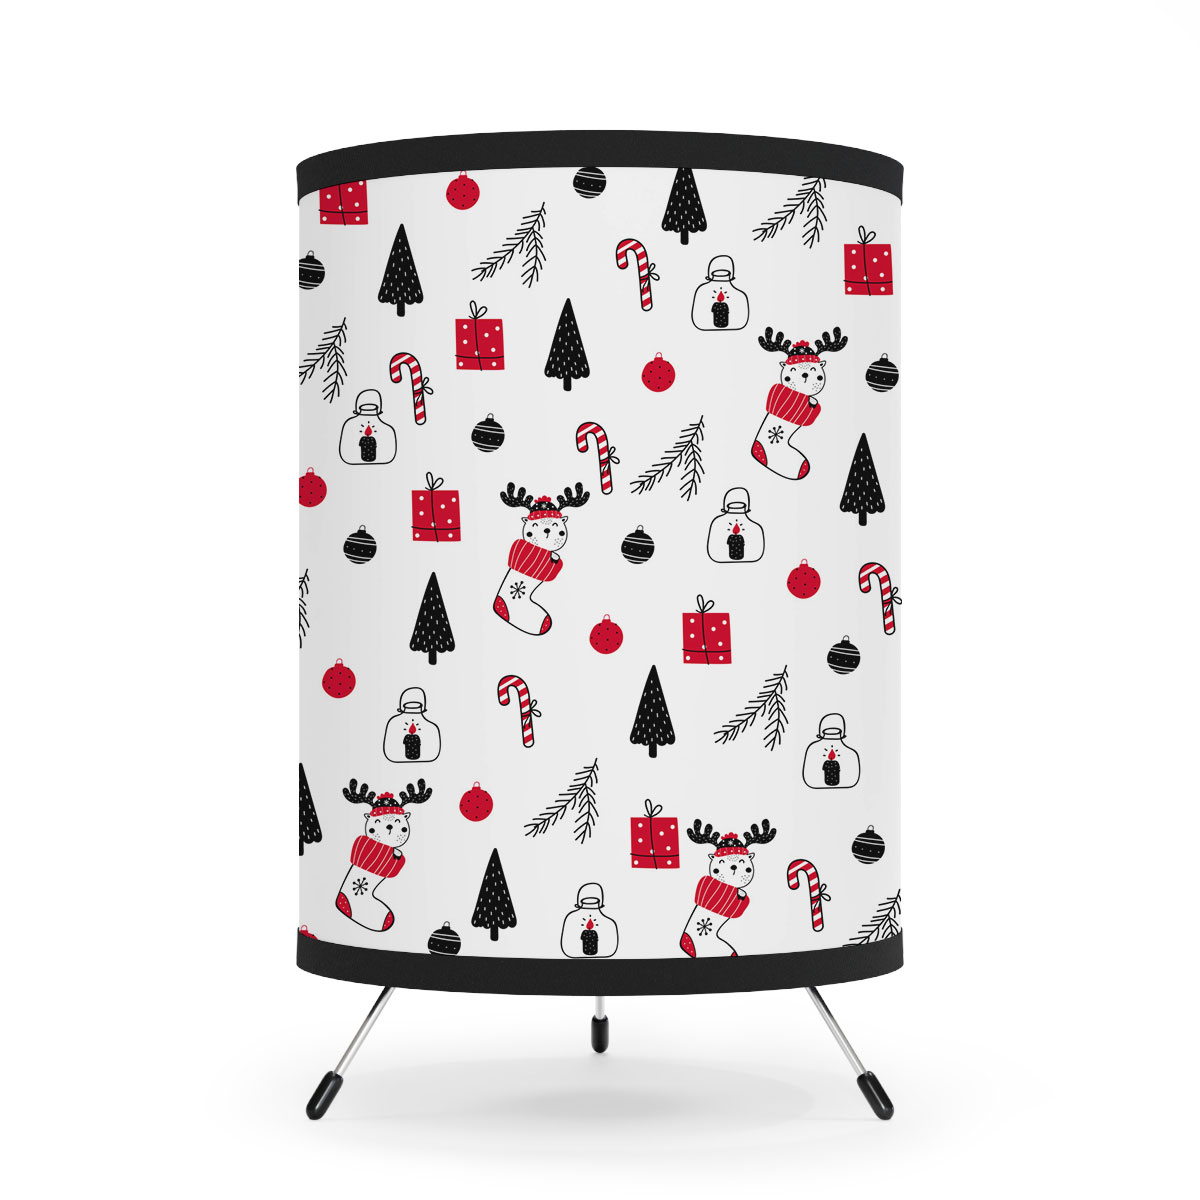 Reindeer Clipart In Hand Drawn Red Socks, Christmas Balls, Candy Canes, And Christmas Gifts Seamless White Pattern Tripod Lamp with High-Res Printed Shade